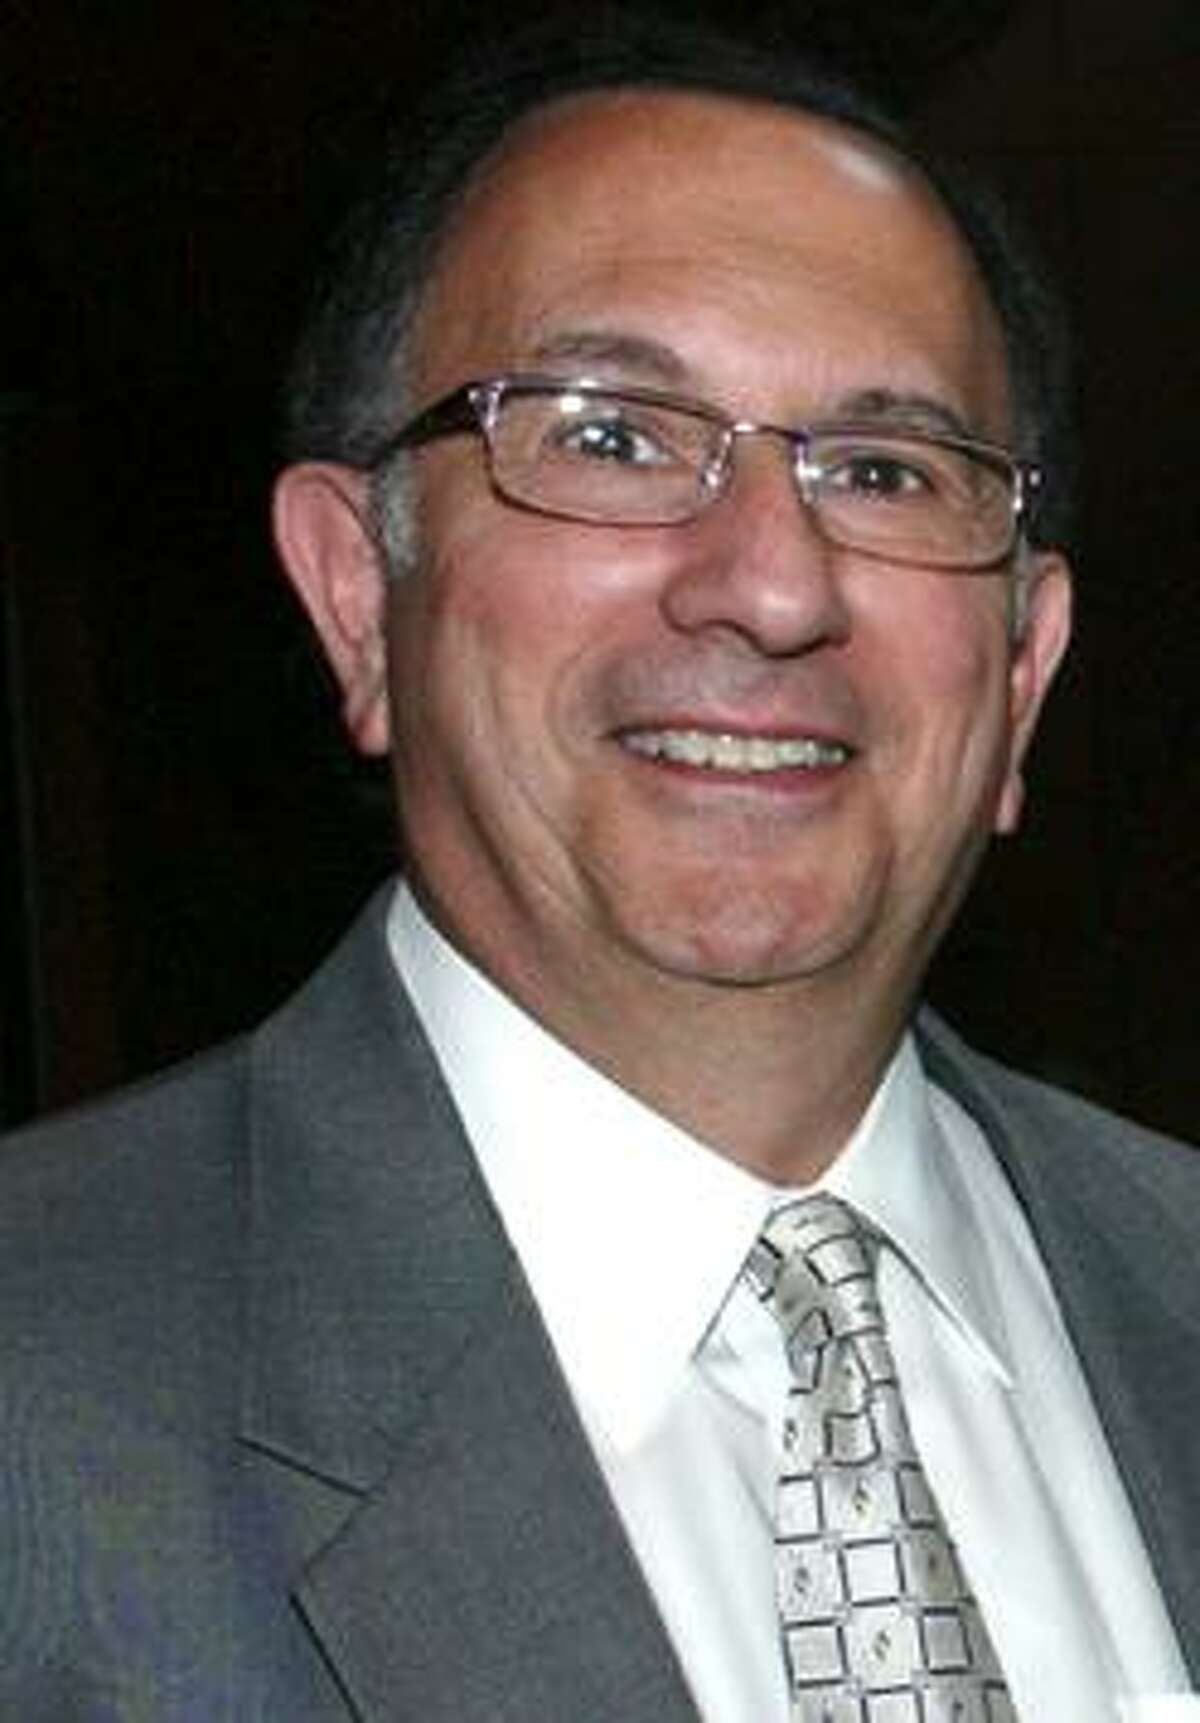 State District Judge Solomon J. Casseb (shown) expressed surprise that San Antonio attorney Todd Prins is accused of fabricating court documents and forging judges’ signatures.